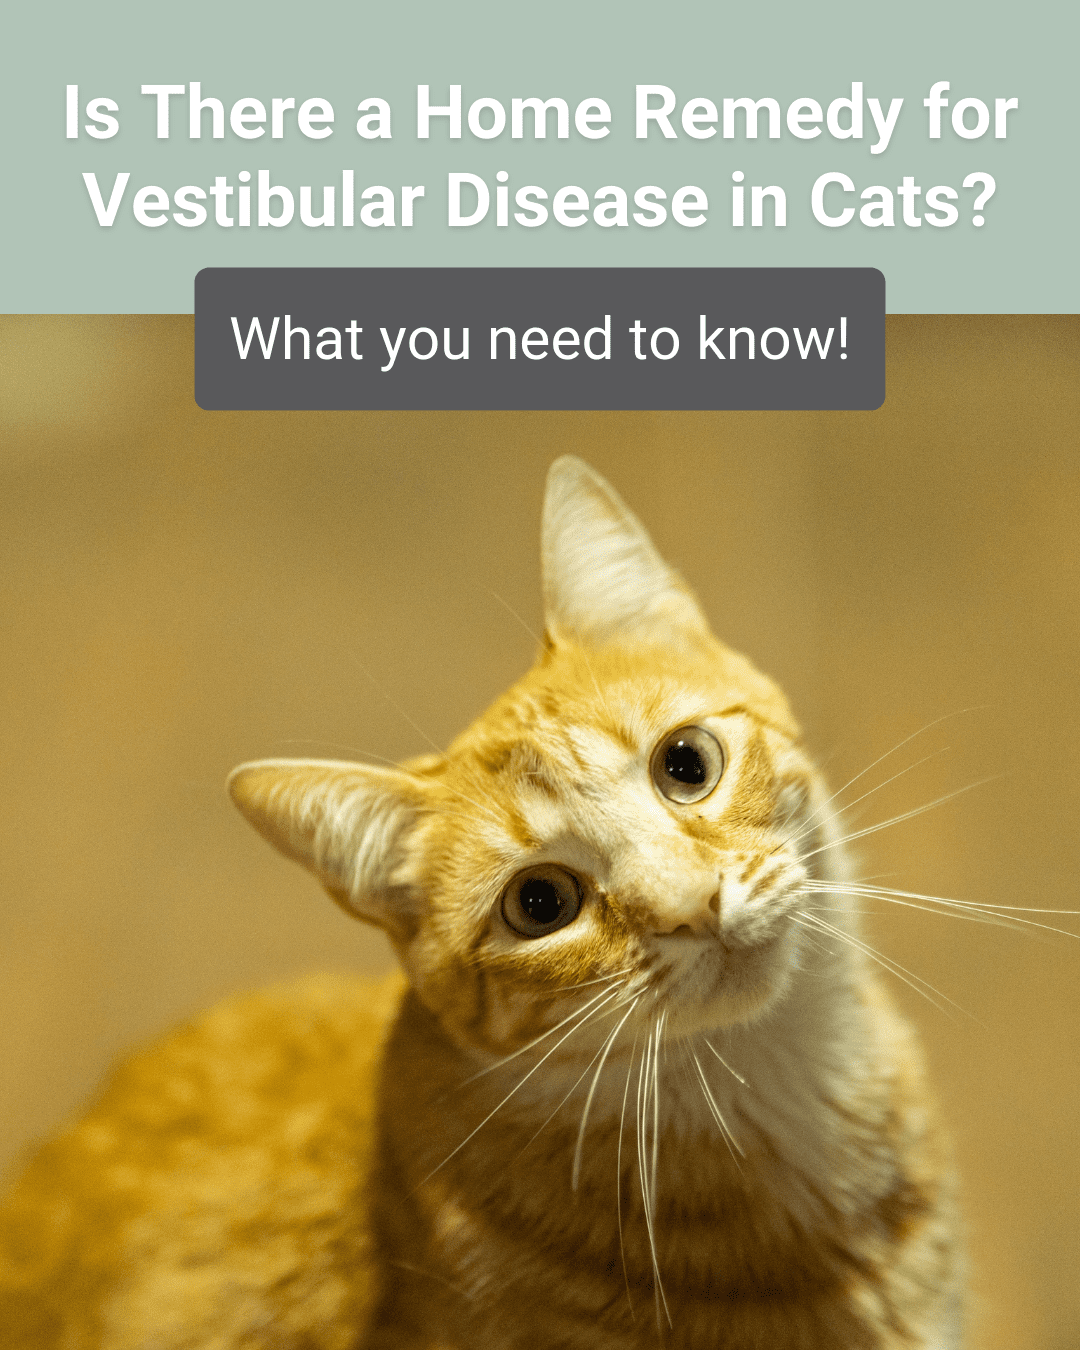 Is There a Home Remedy for Vestibular Disease in Cats?